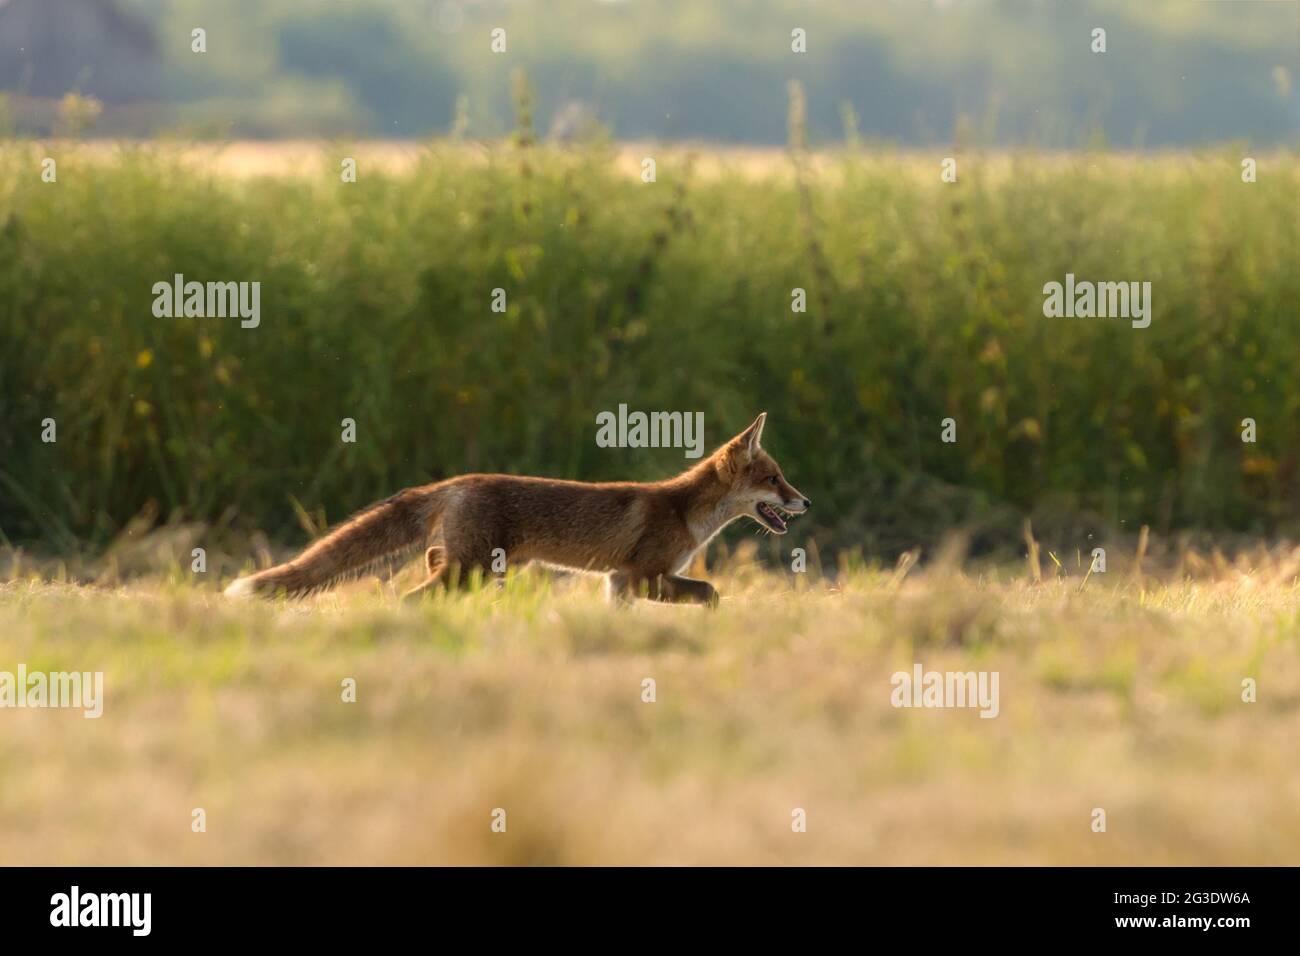 The red fox (Vulpes vulpes) is the largest of the true foxes and one of the most widely distributed members of the order Carnivora, being present acro Stock Photo